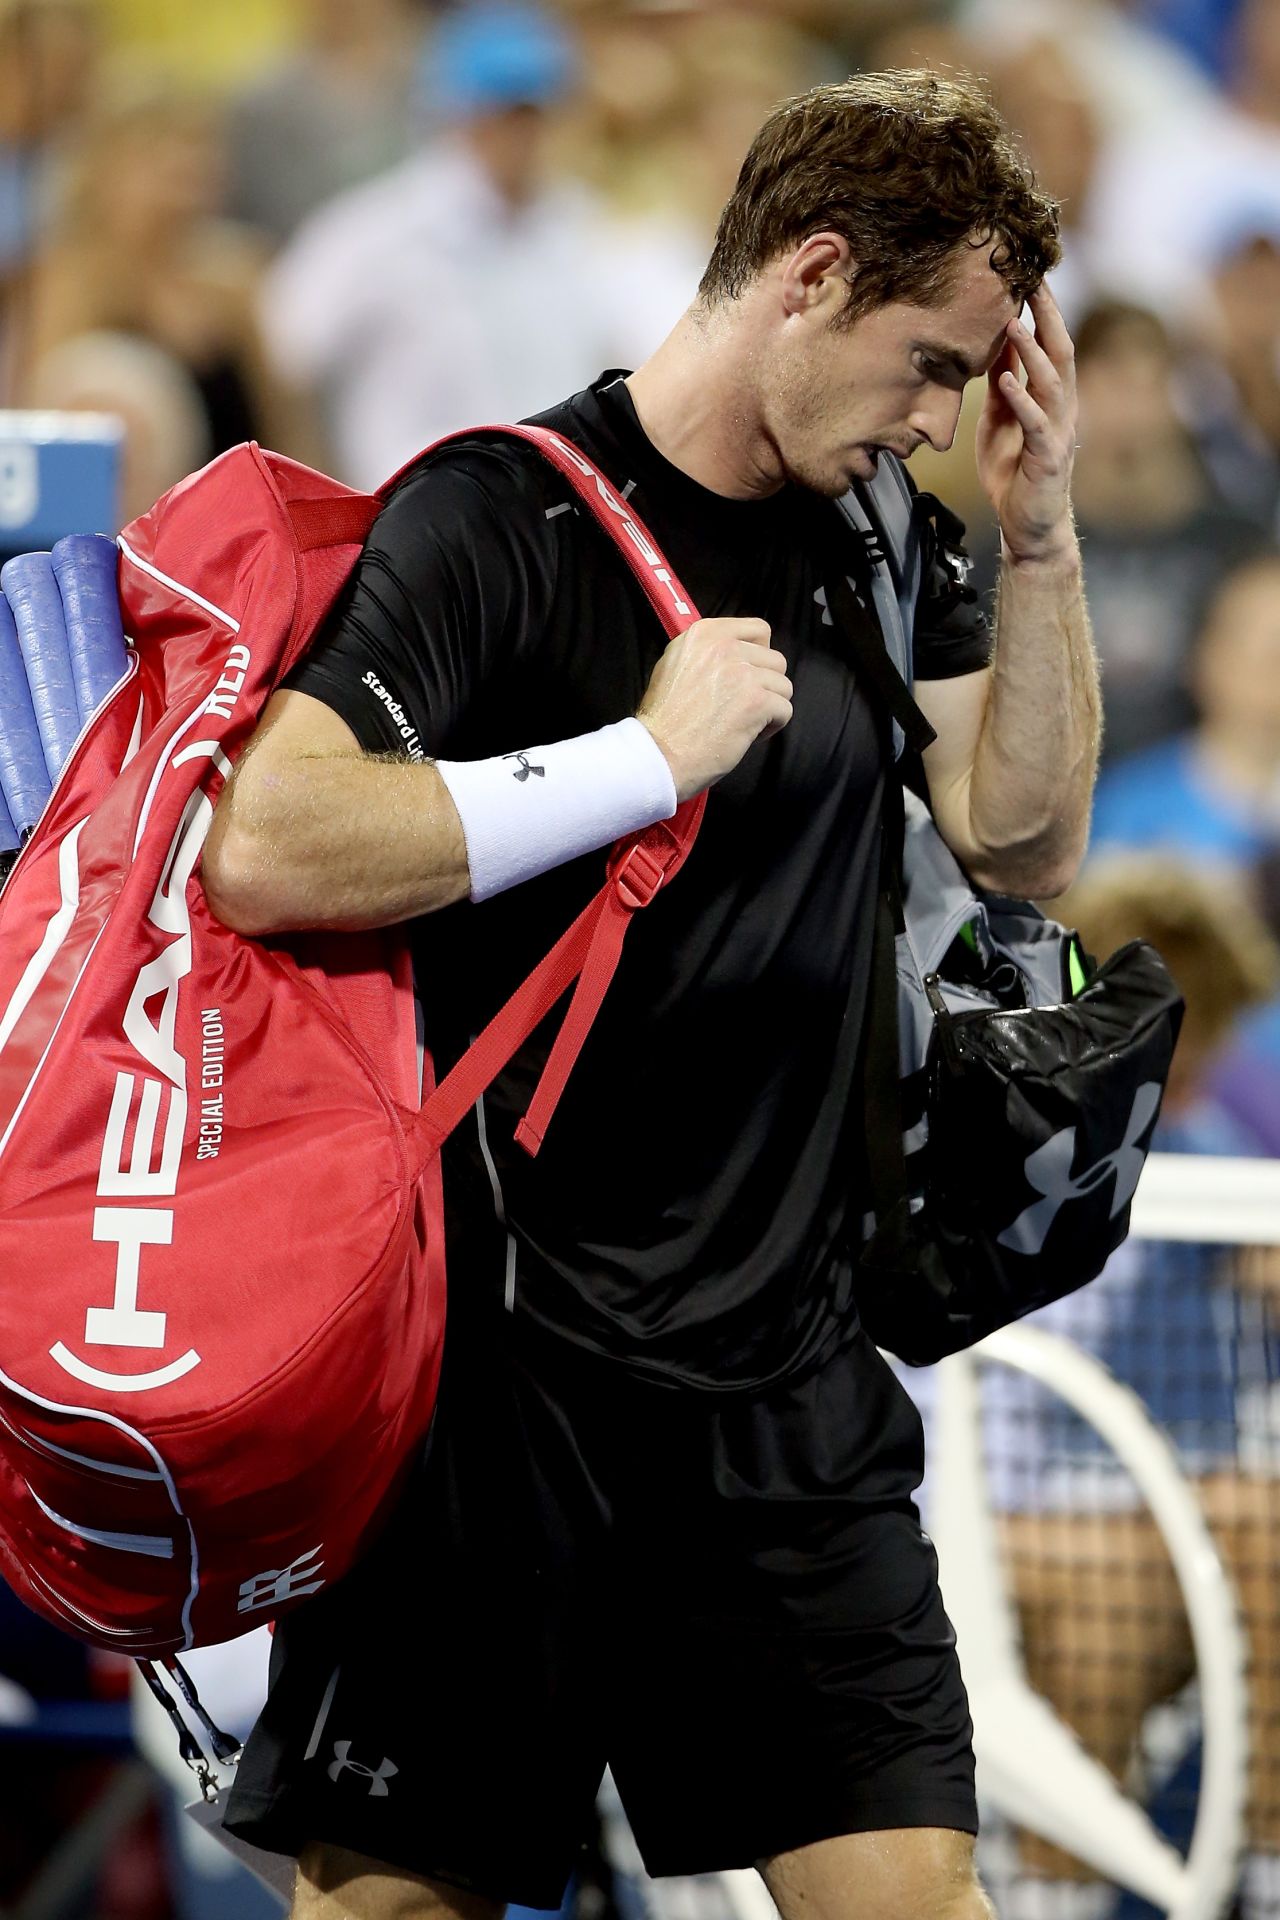 Andy Murray leaves the court after losing to Kevin Anderson during their men's singles fourth round match at the 2015 U.S. Open on September 7, 2015 in Queens, New York.